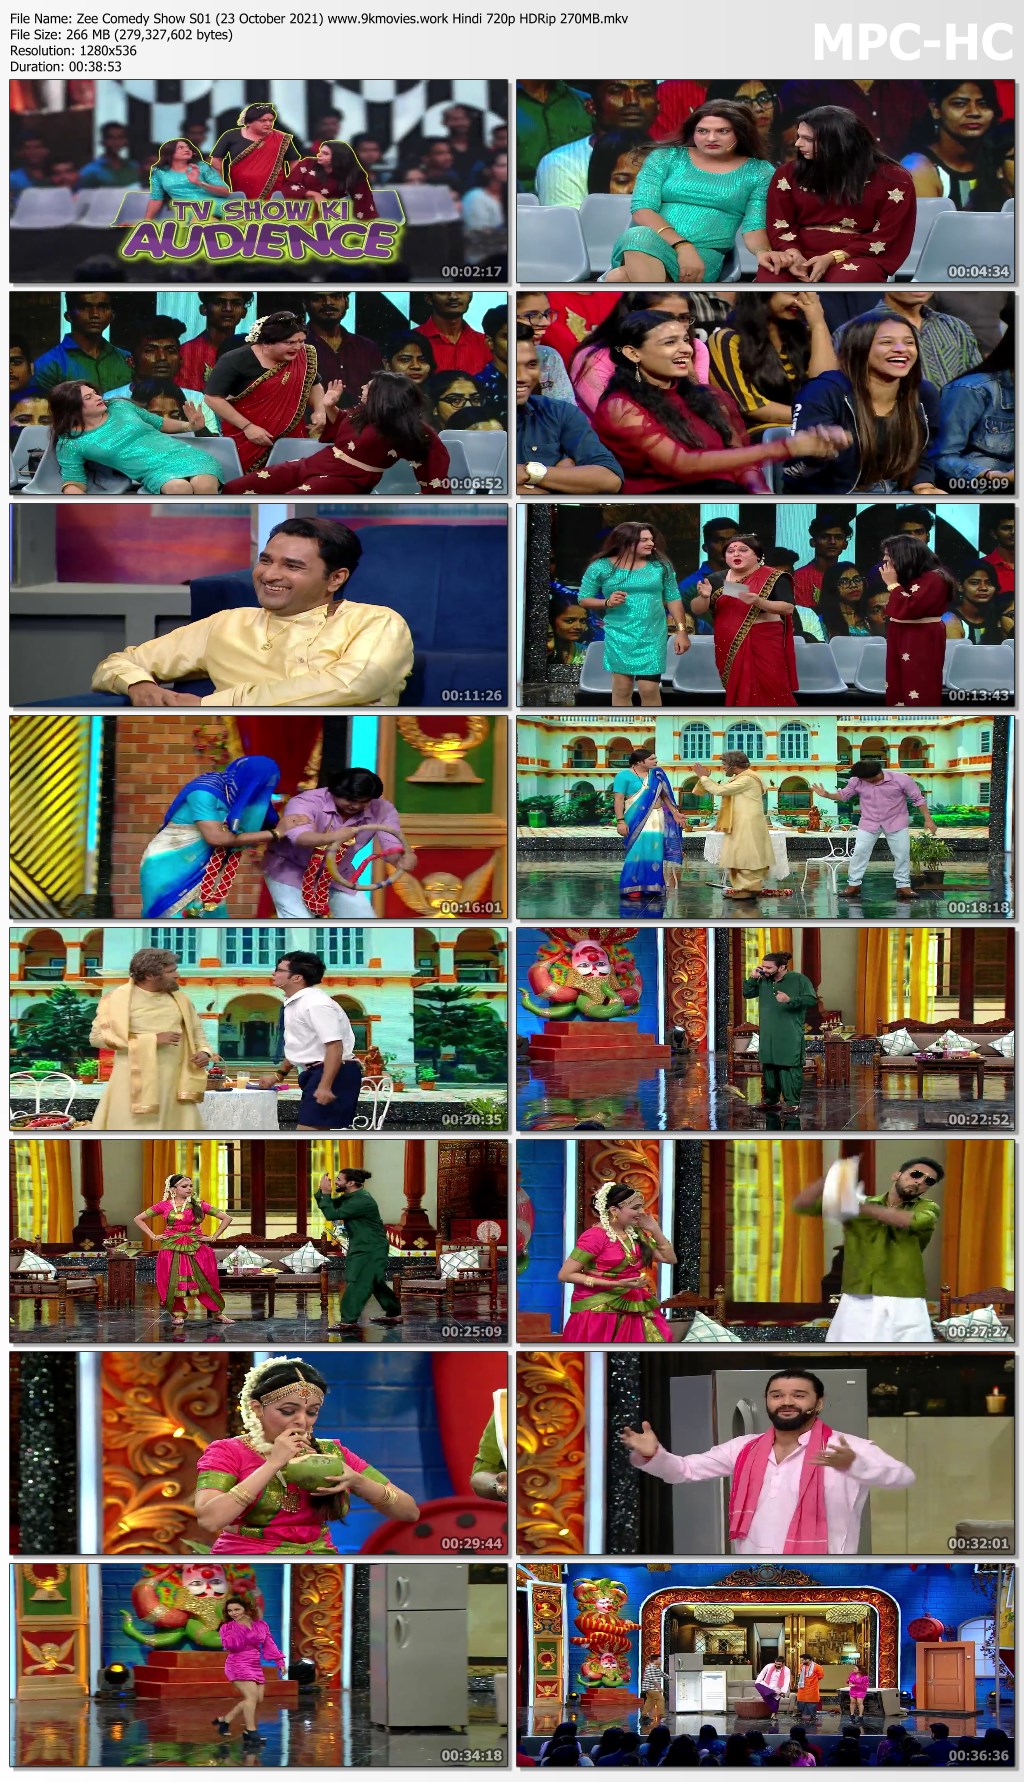 Zee Comedy Show S01 23 October 2021 www.9kmovies.work Hindi 720p HDRip 270MB.mkv thumbs84a48840bd9d699f